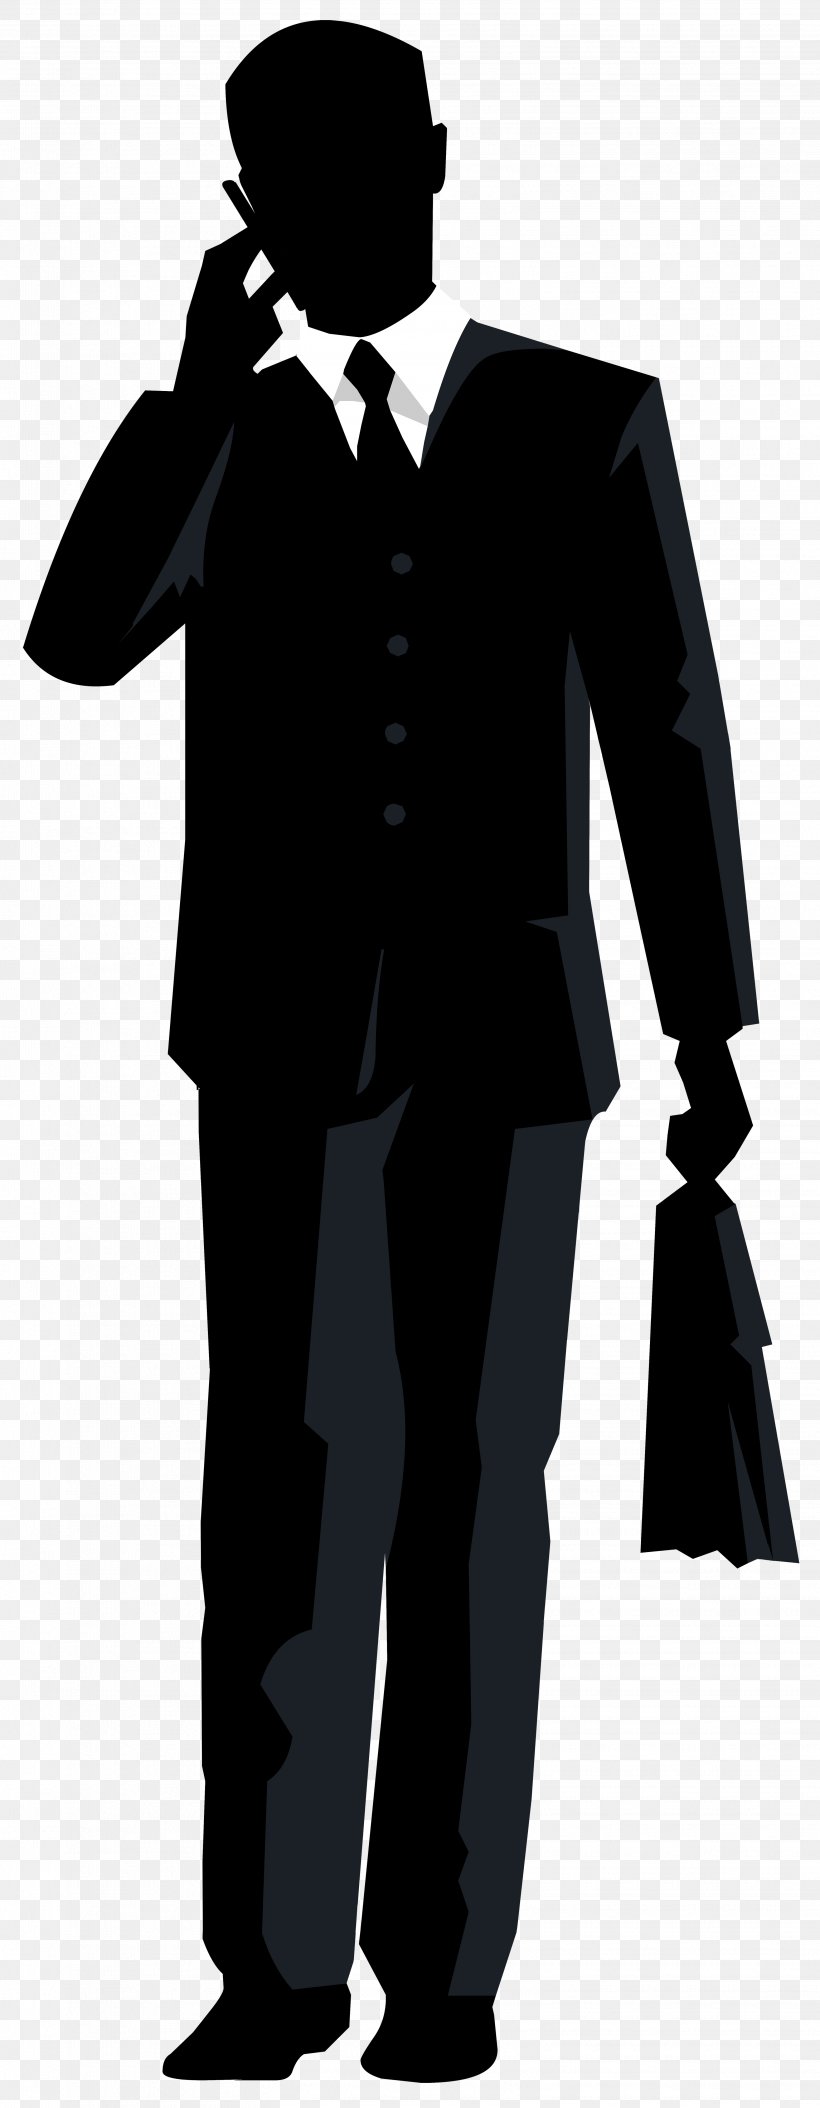 Silhouette Clip Art, PNG, 3111x8000px, Silhouette, Black And White, Business, Businessperson, Costume Download Free